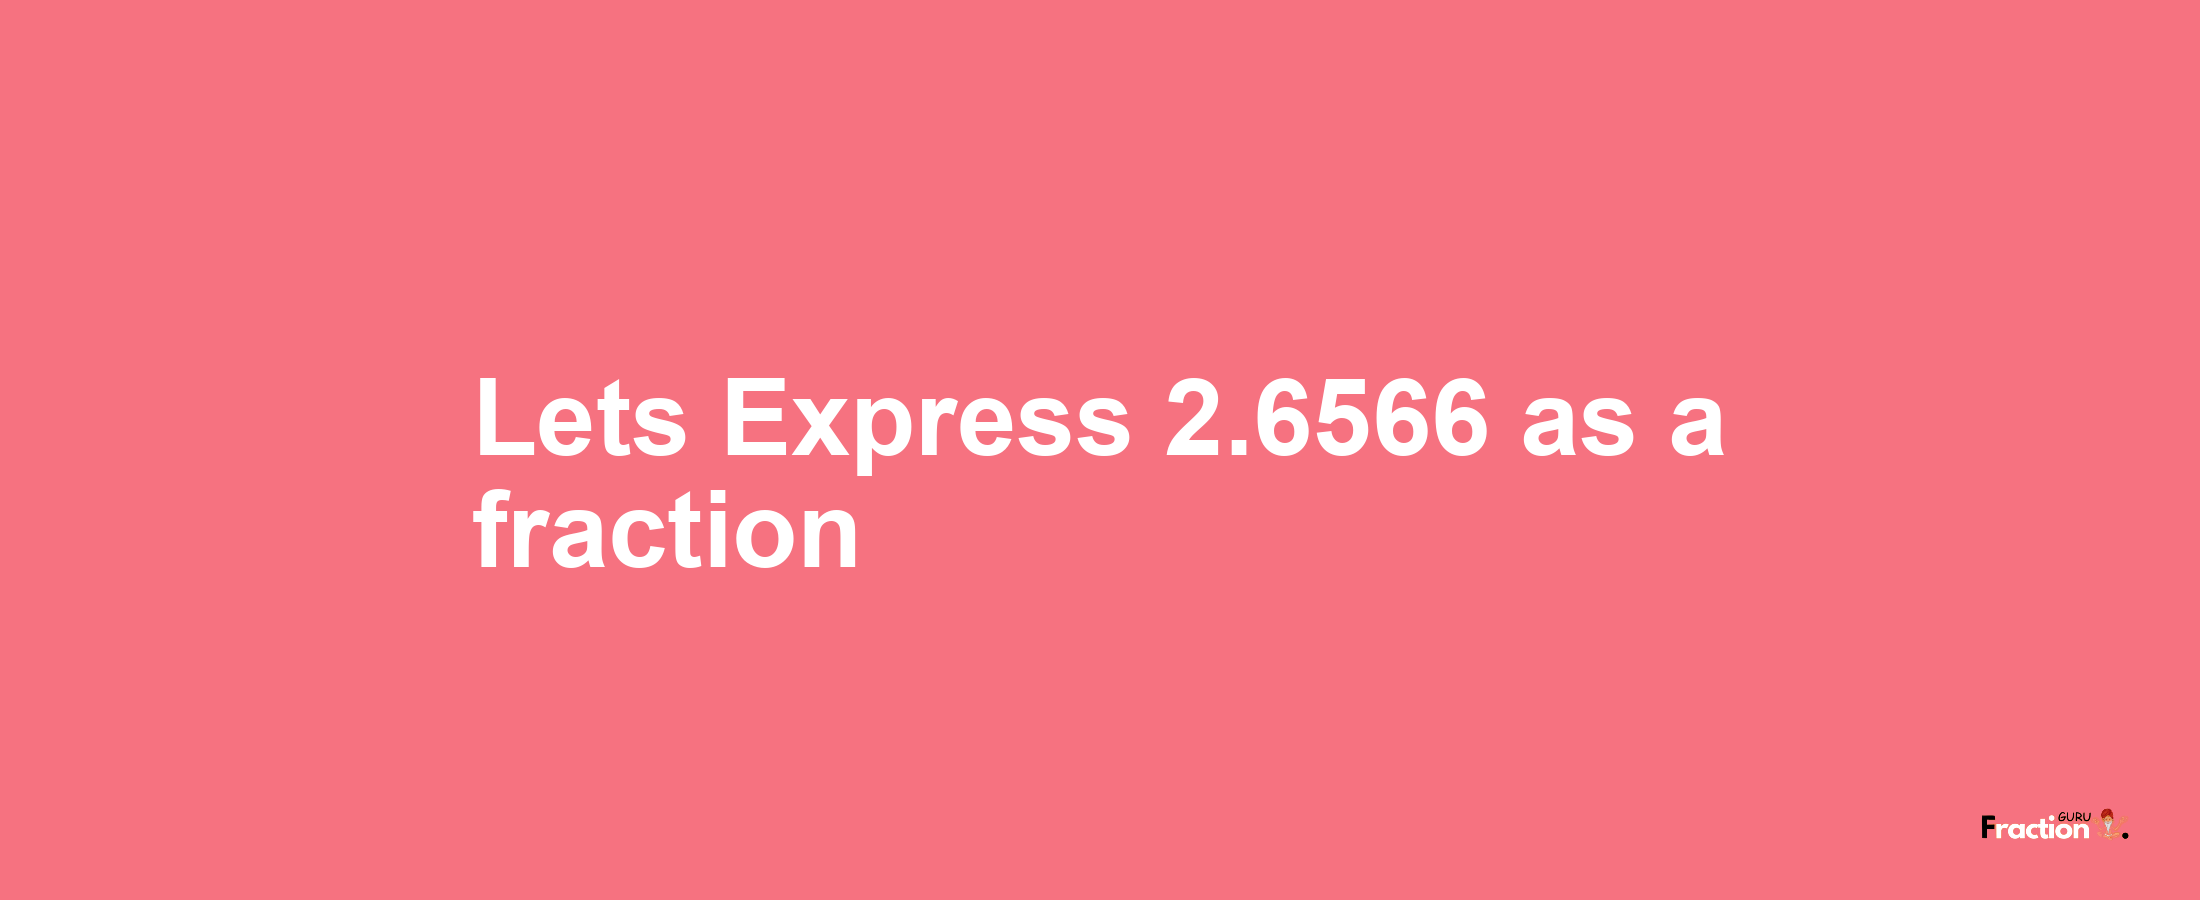 Lets Express 2.6566 as afraction